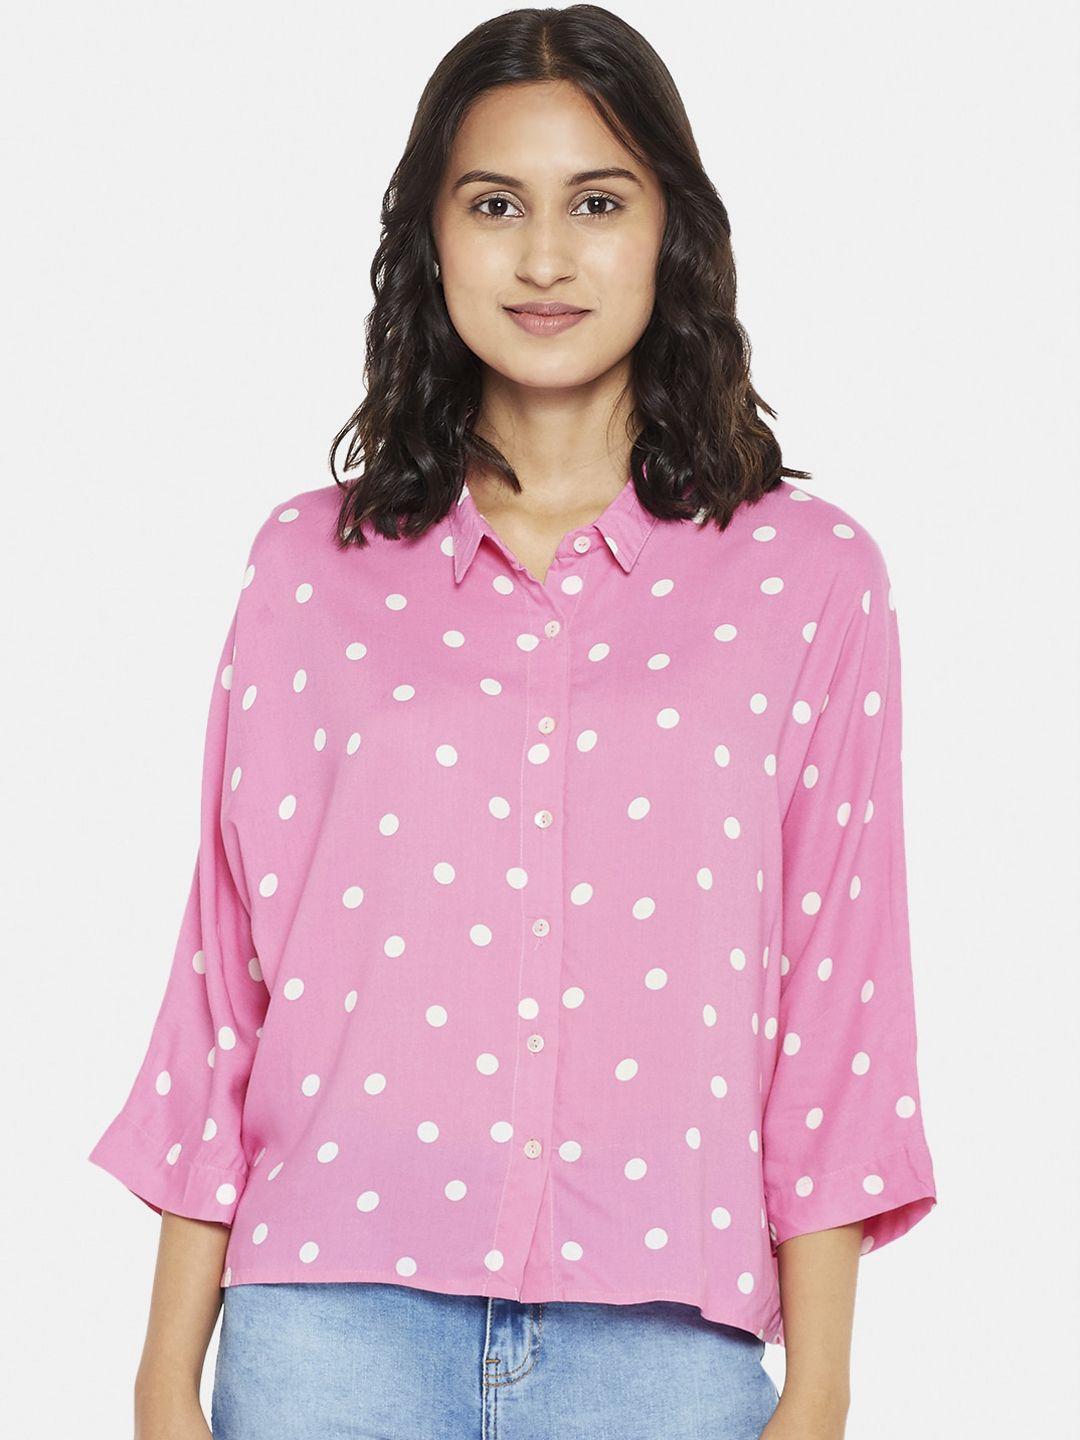 people women pink & white opaque polka dots printed casual shirt